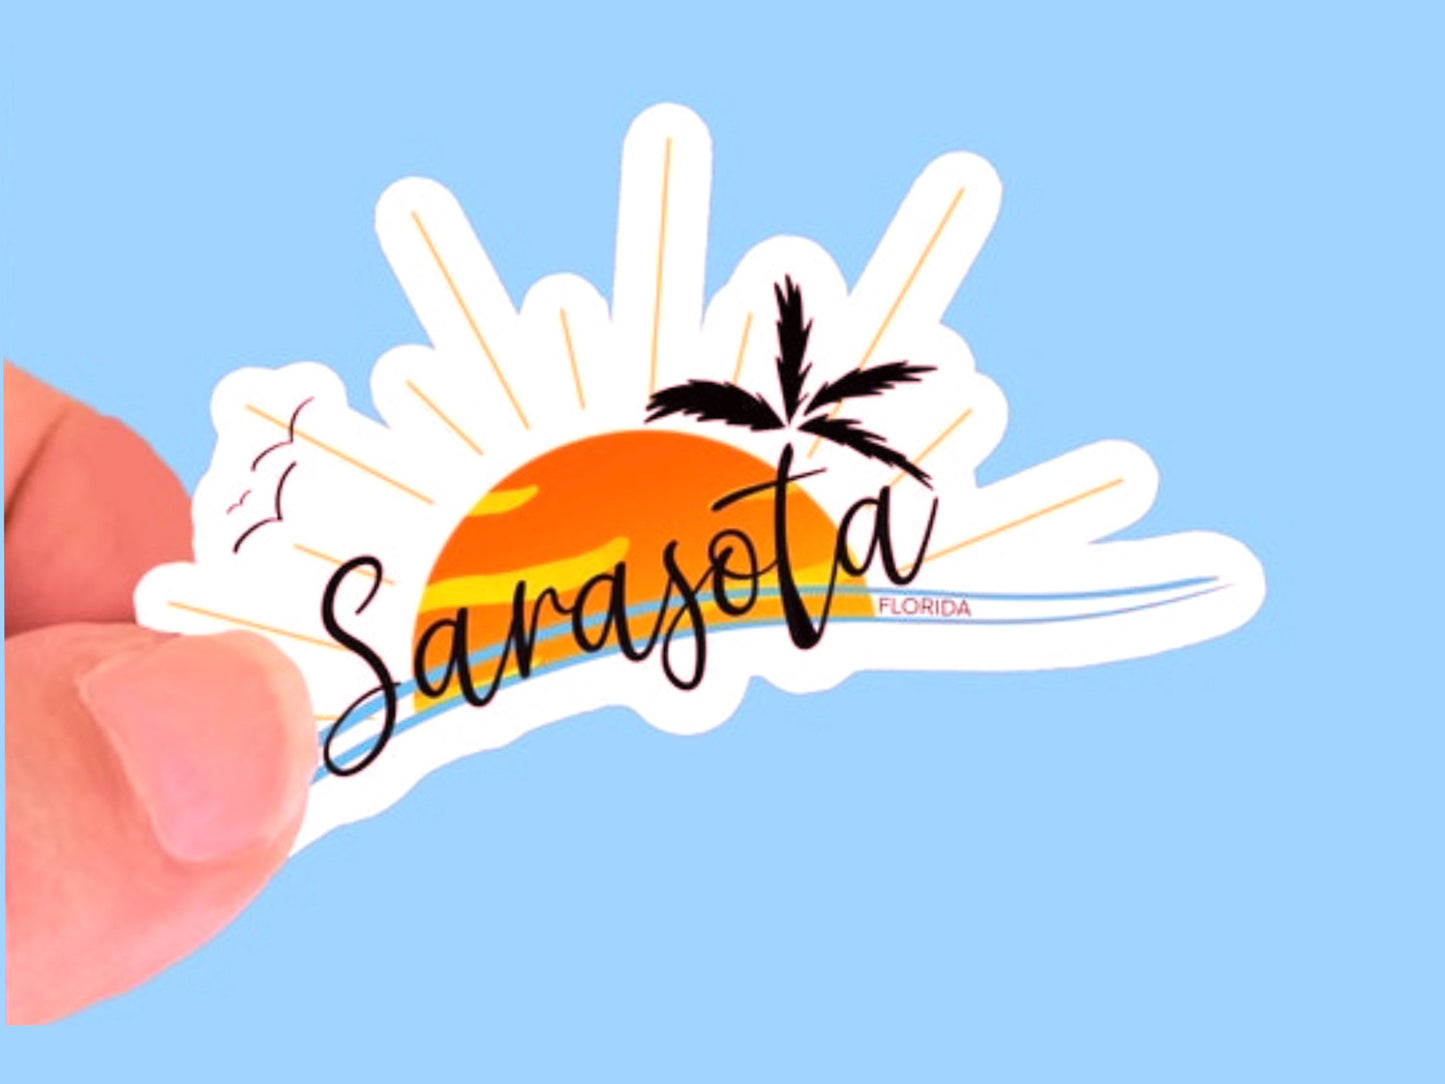 Sarasota Sunset Sticker, 2.5 inch Vinyl Waterproof Sticker, Use for water bottles, laptops, luggage, candle jars and morechoice of size